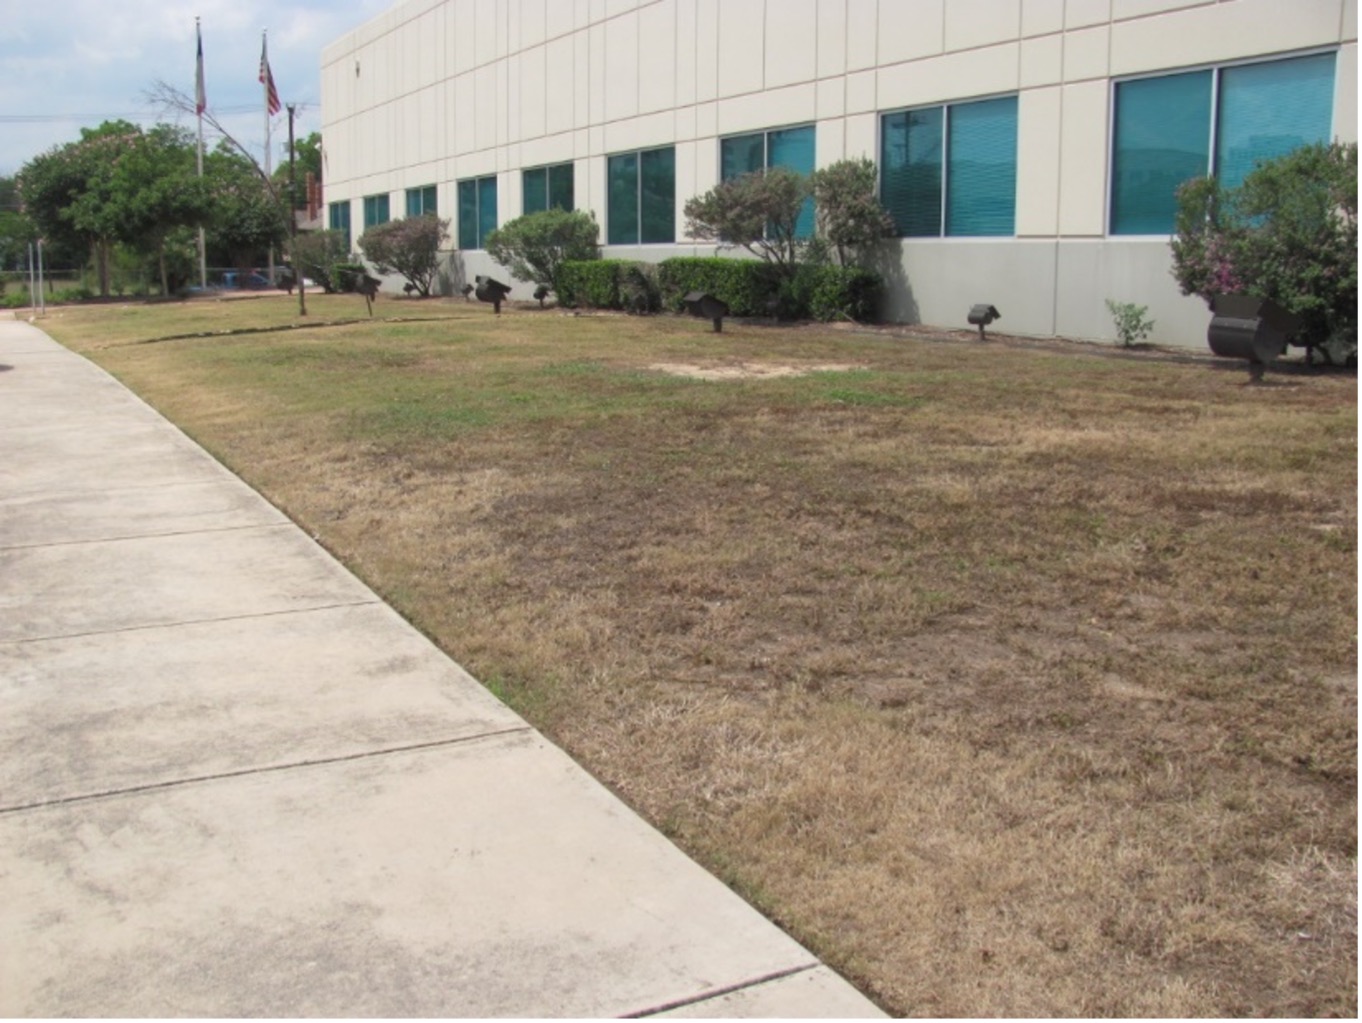 Before image of garden in front of Euclid River Authority building